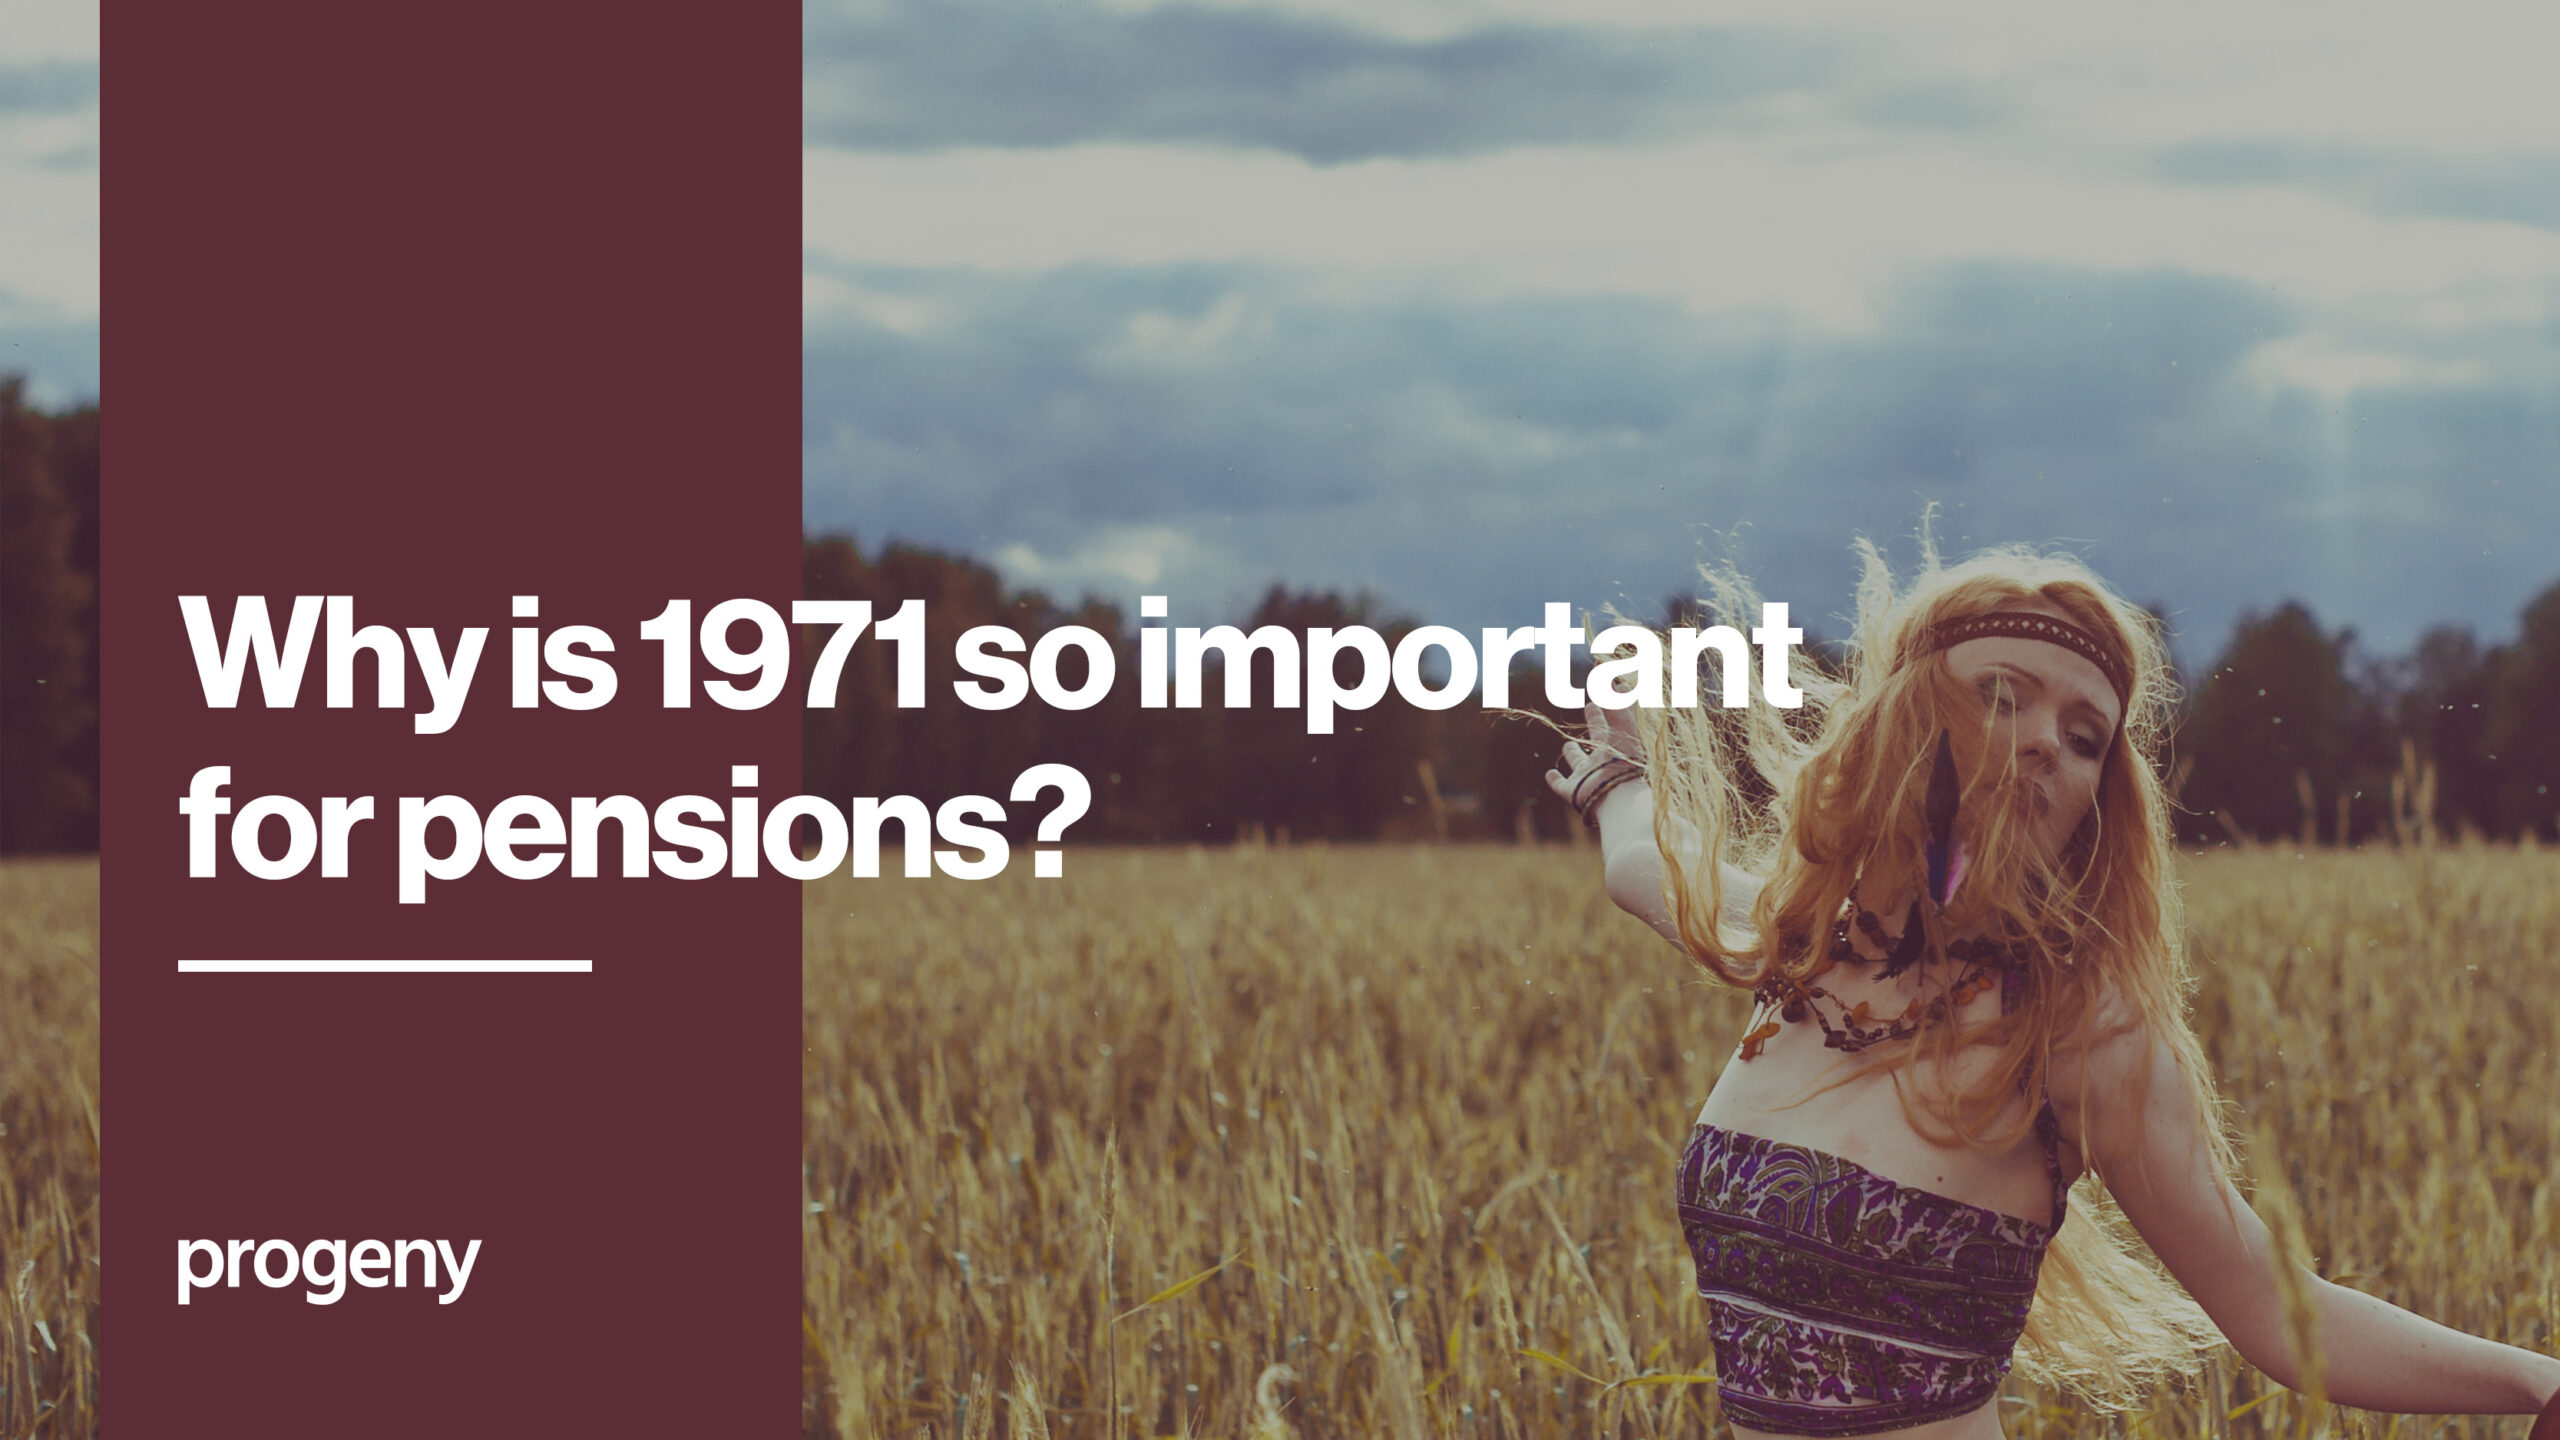 Why is 1971 so important for pensions?